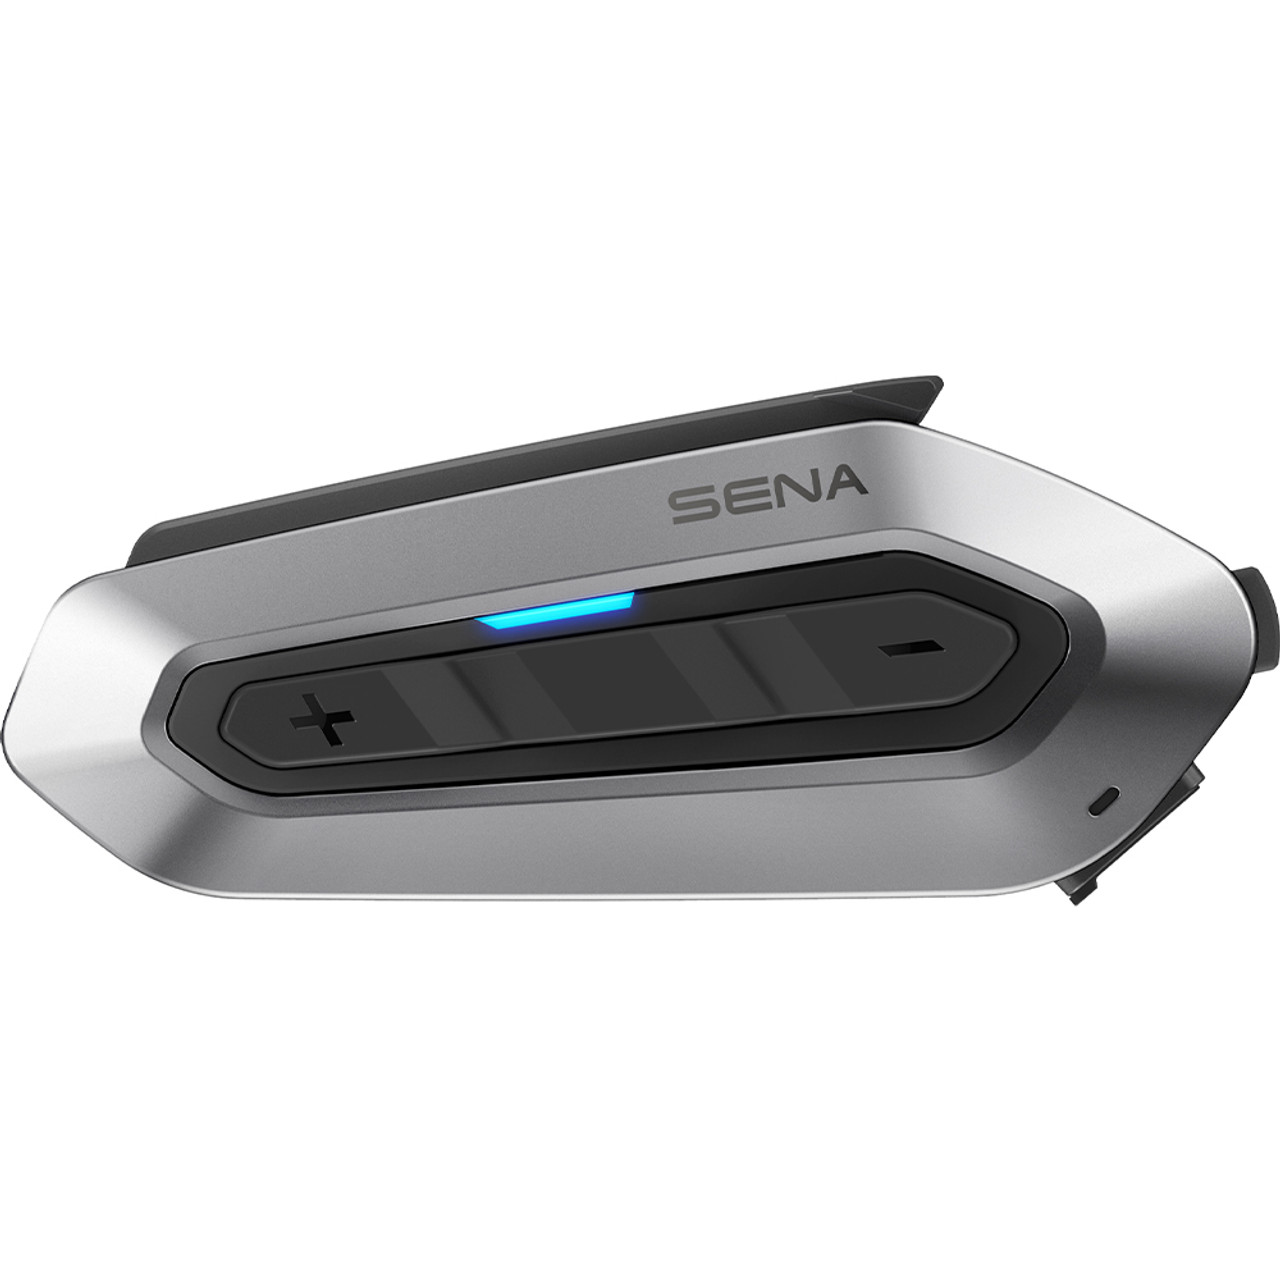 Sena updates its motorcycle Bluetooth comms with new 50S and 50R